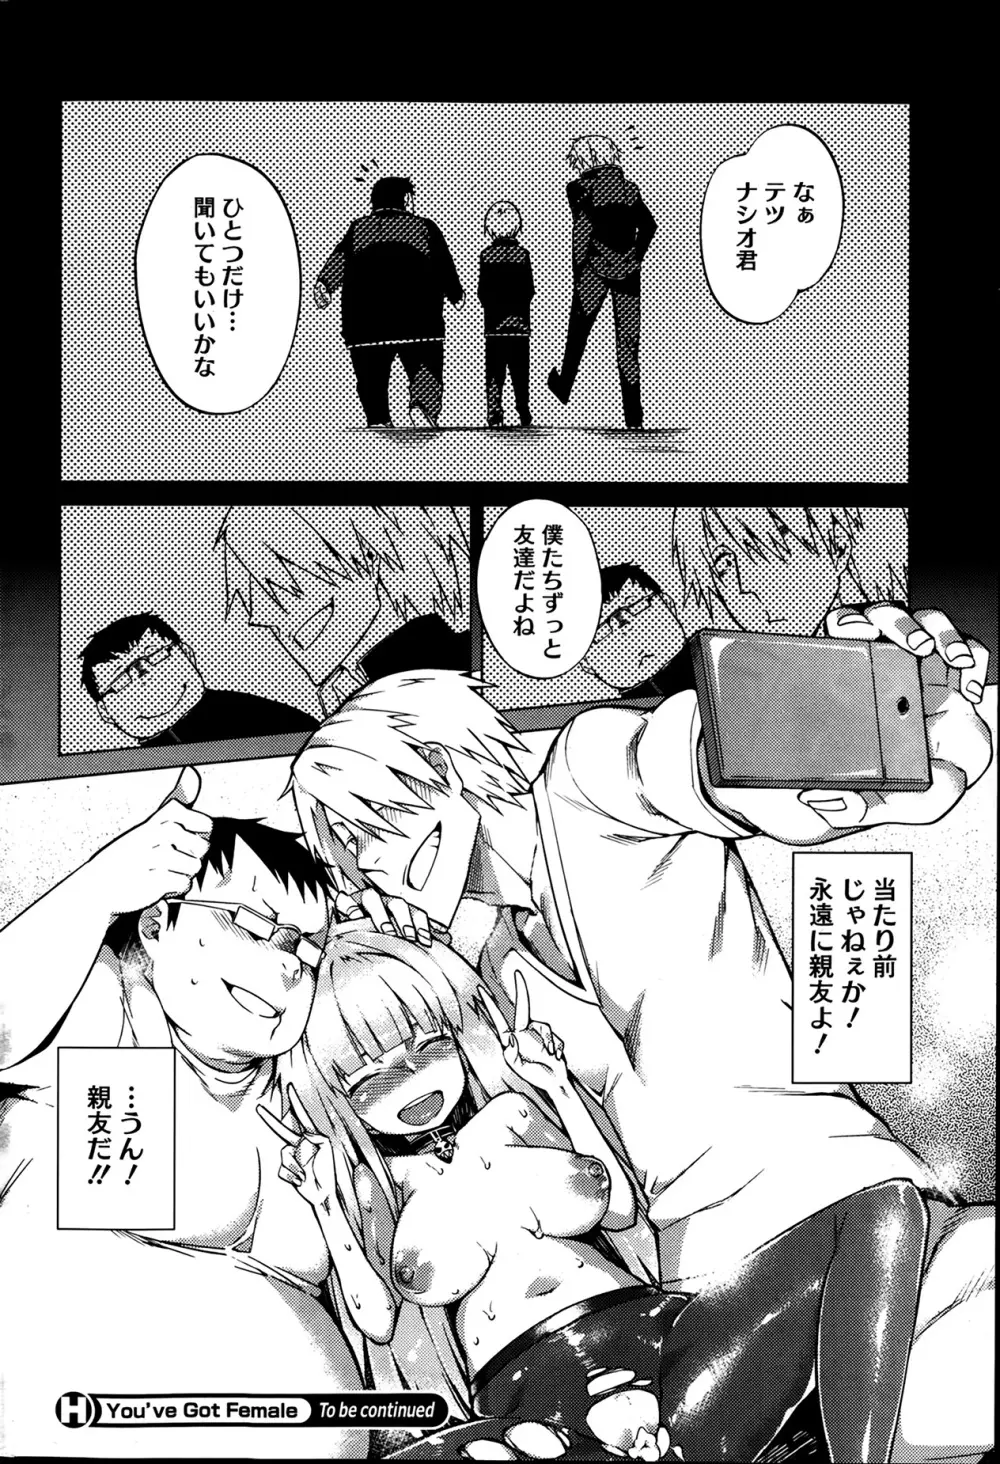 You've Got Female 第01-03話 Page.45